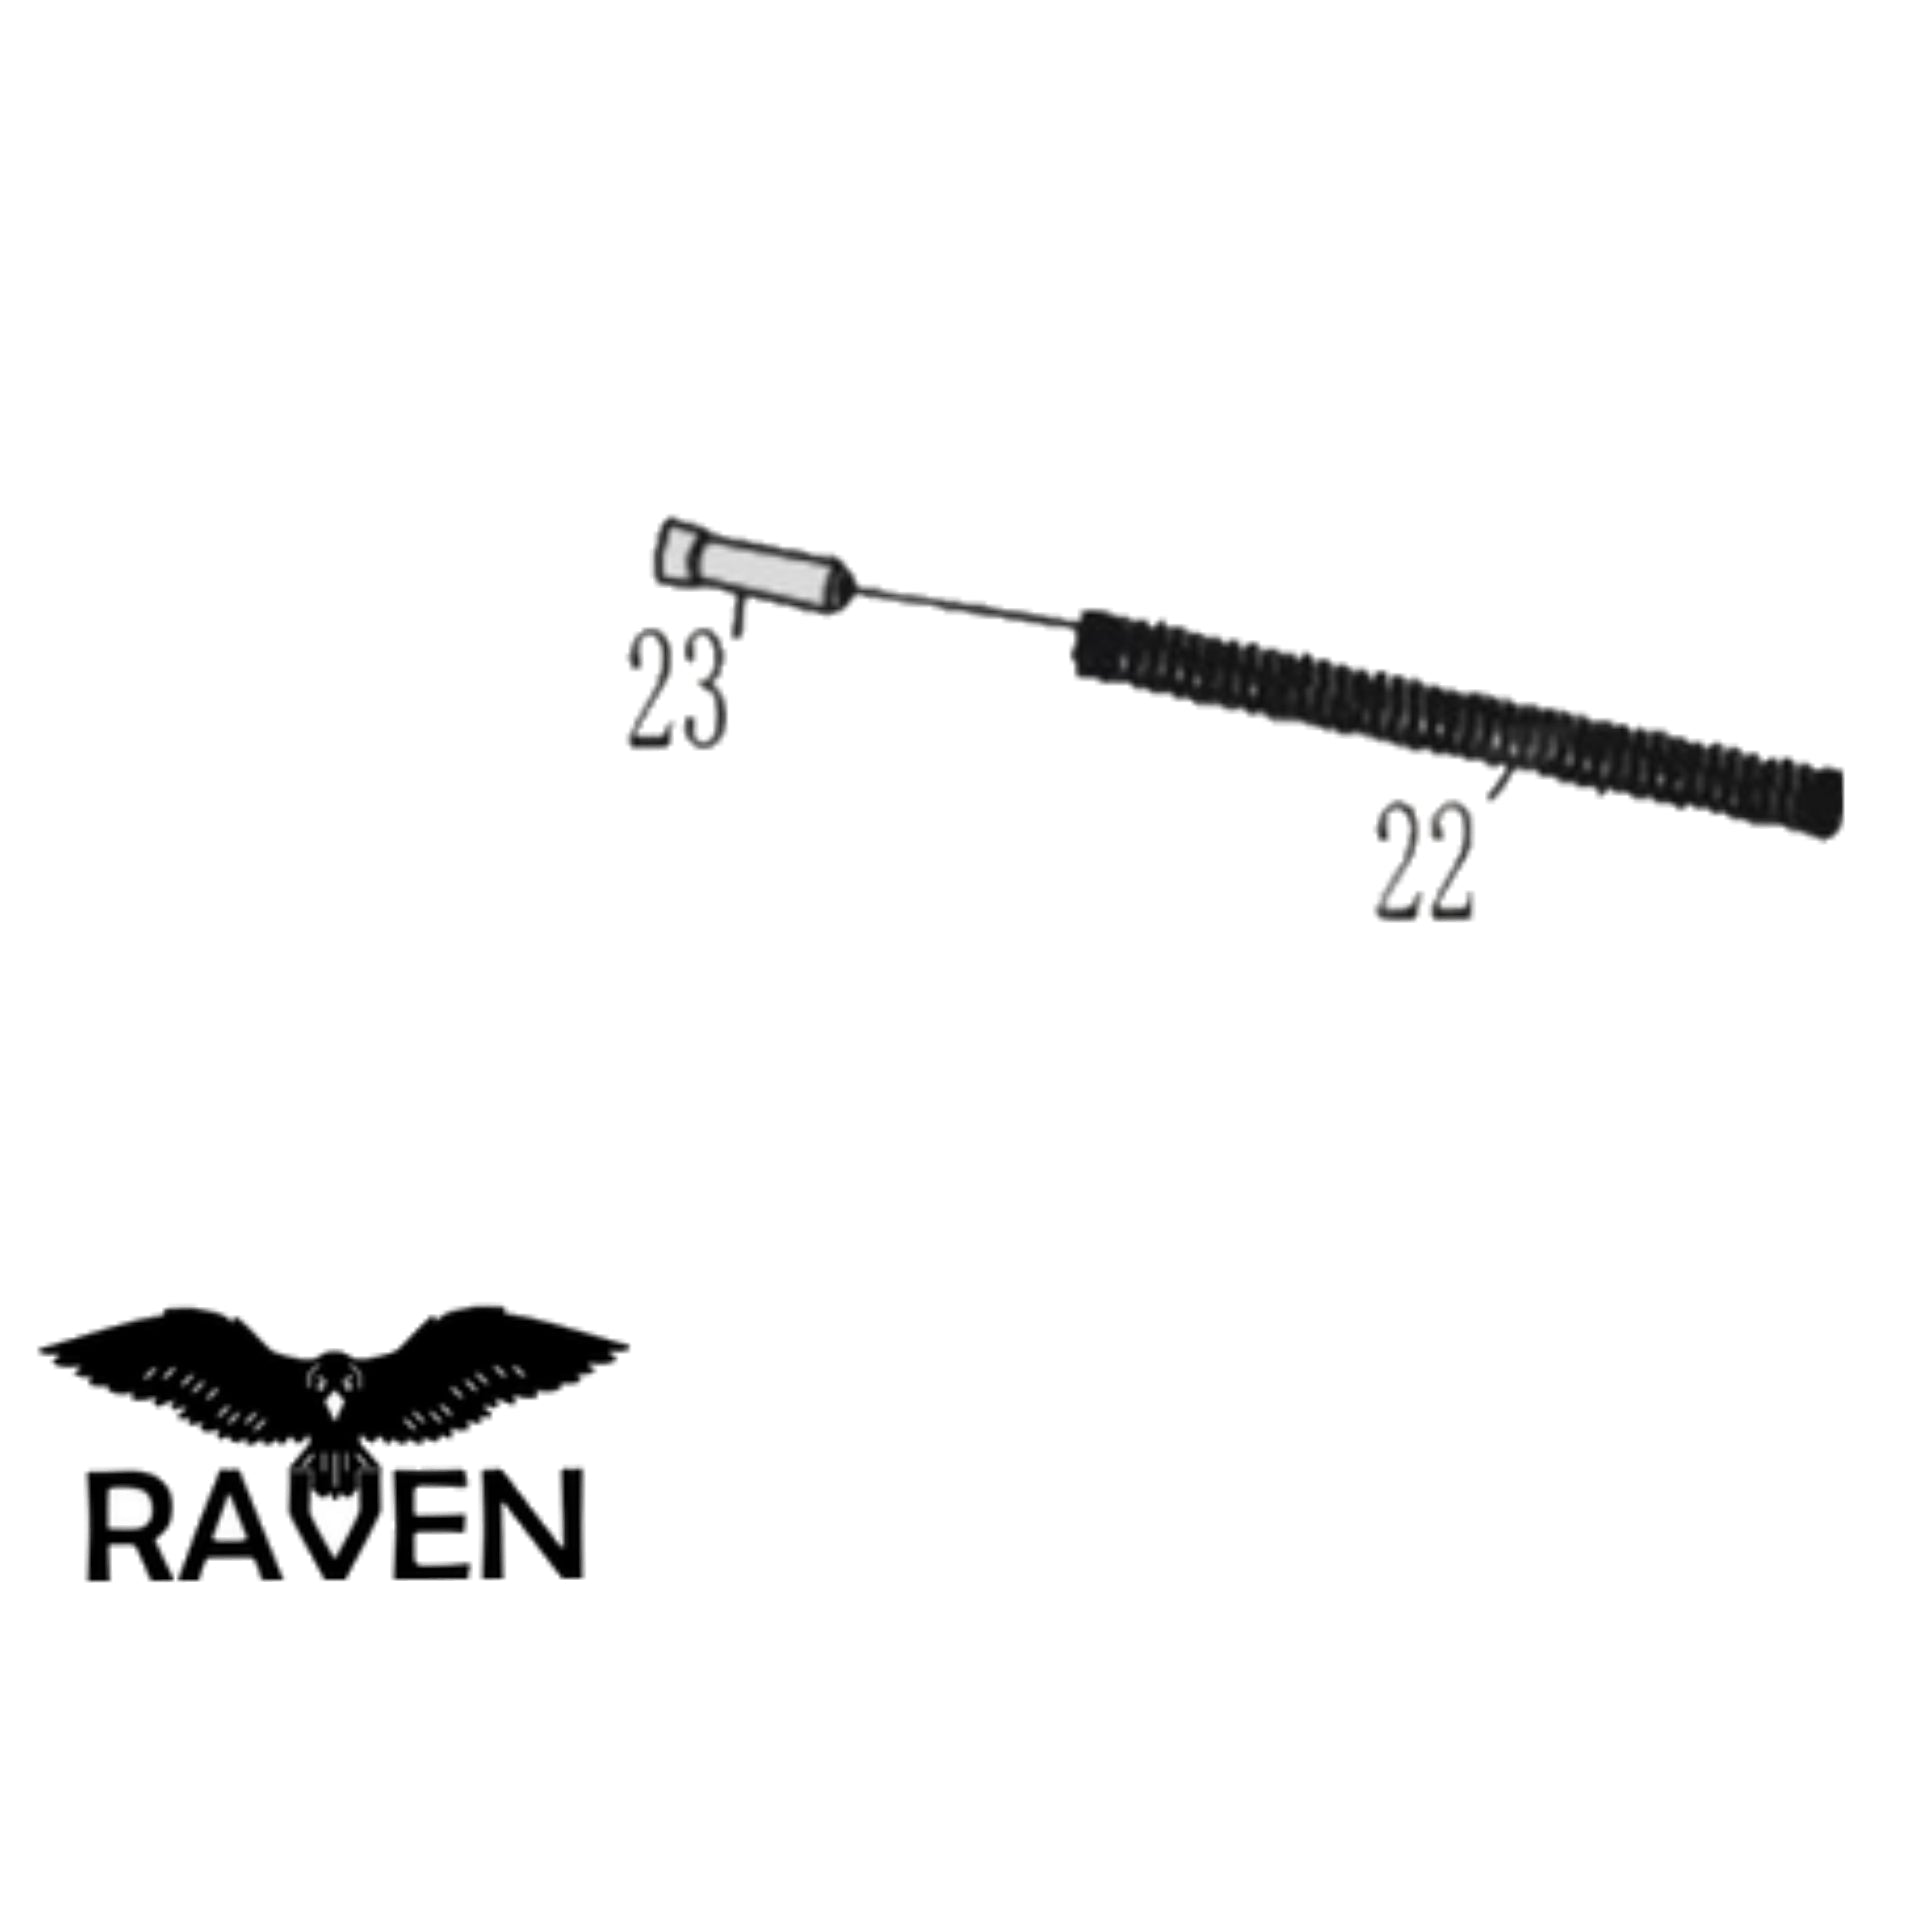 Raven EU Nozzle Return Spring and Guide